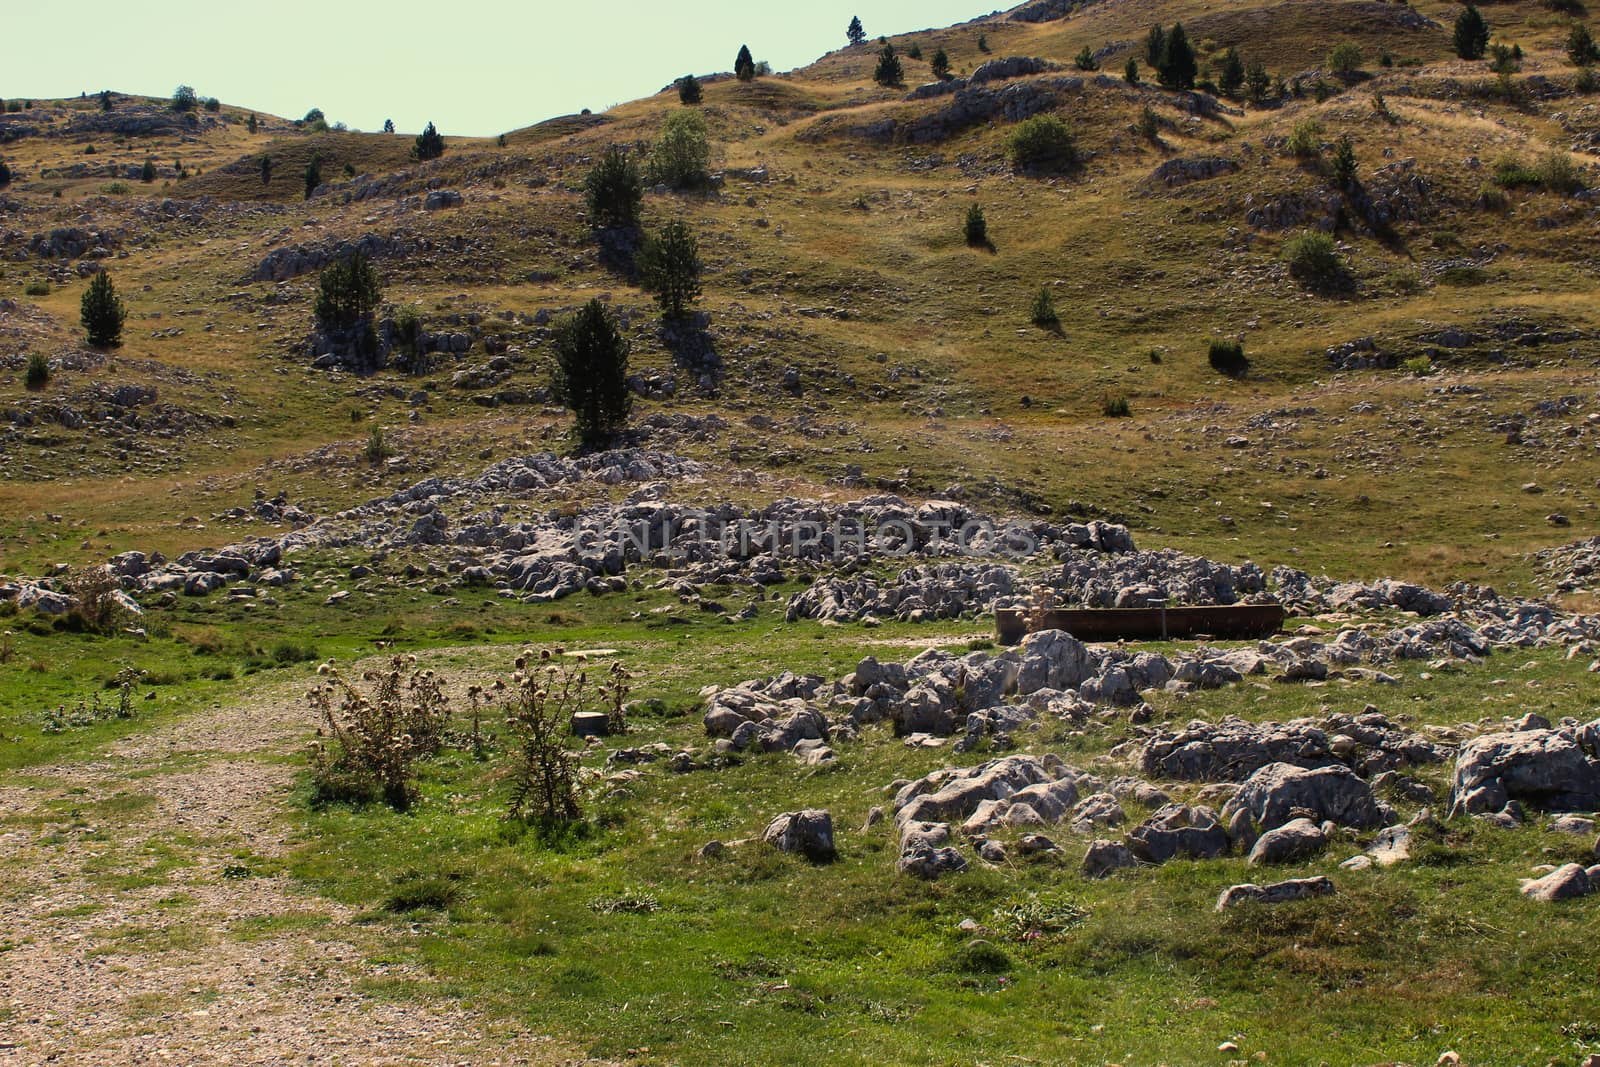 Access to the place where cattle (cows, sheep, goats, wild animals, etc.) drink water. Rocky part of Bjelasnica mountain, Bosnia and Herzegovina.